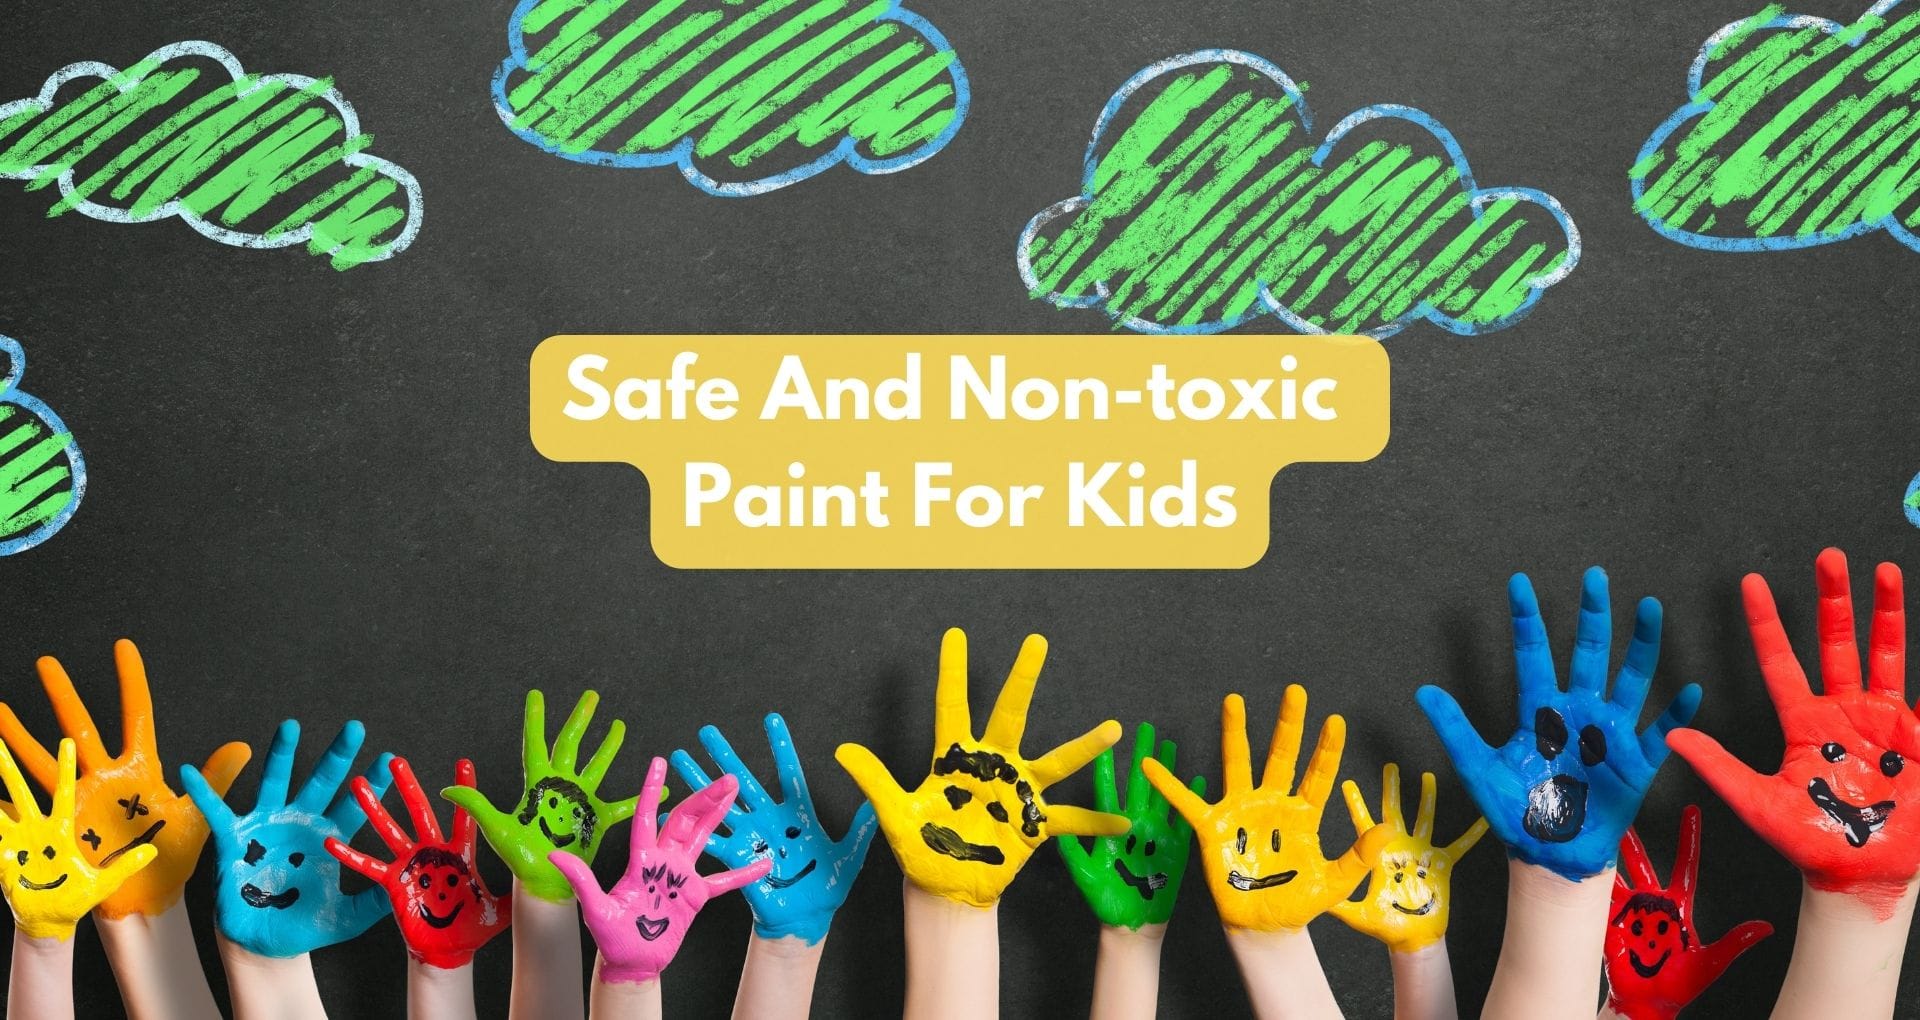 How Do I Choose Safe And Non-toxic Paint For Kids?